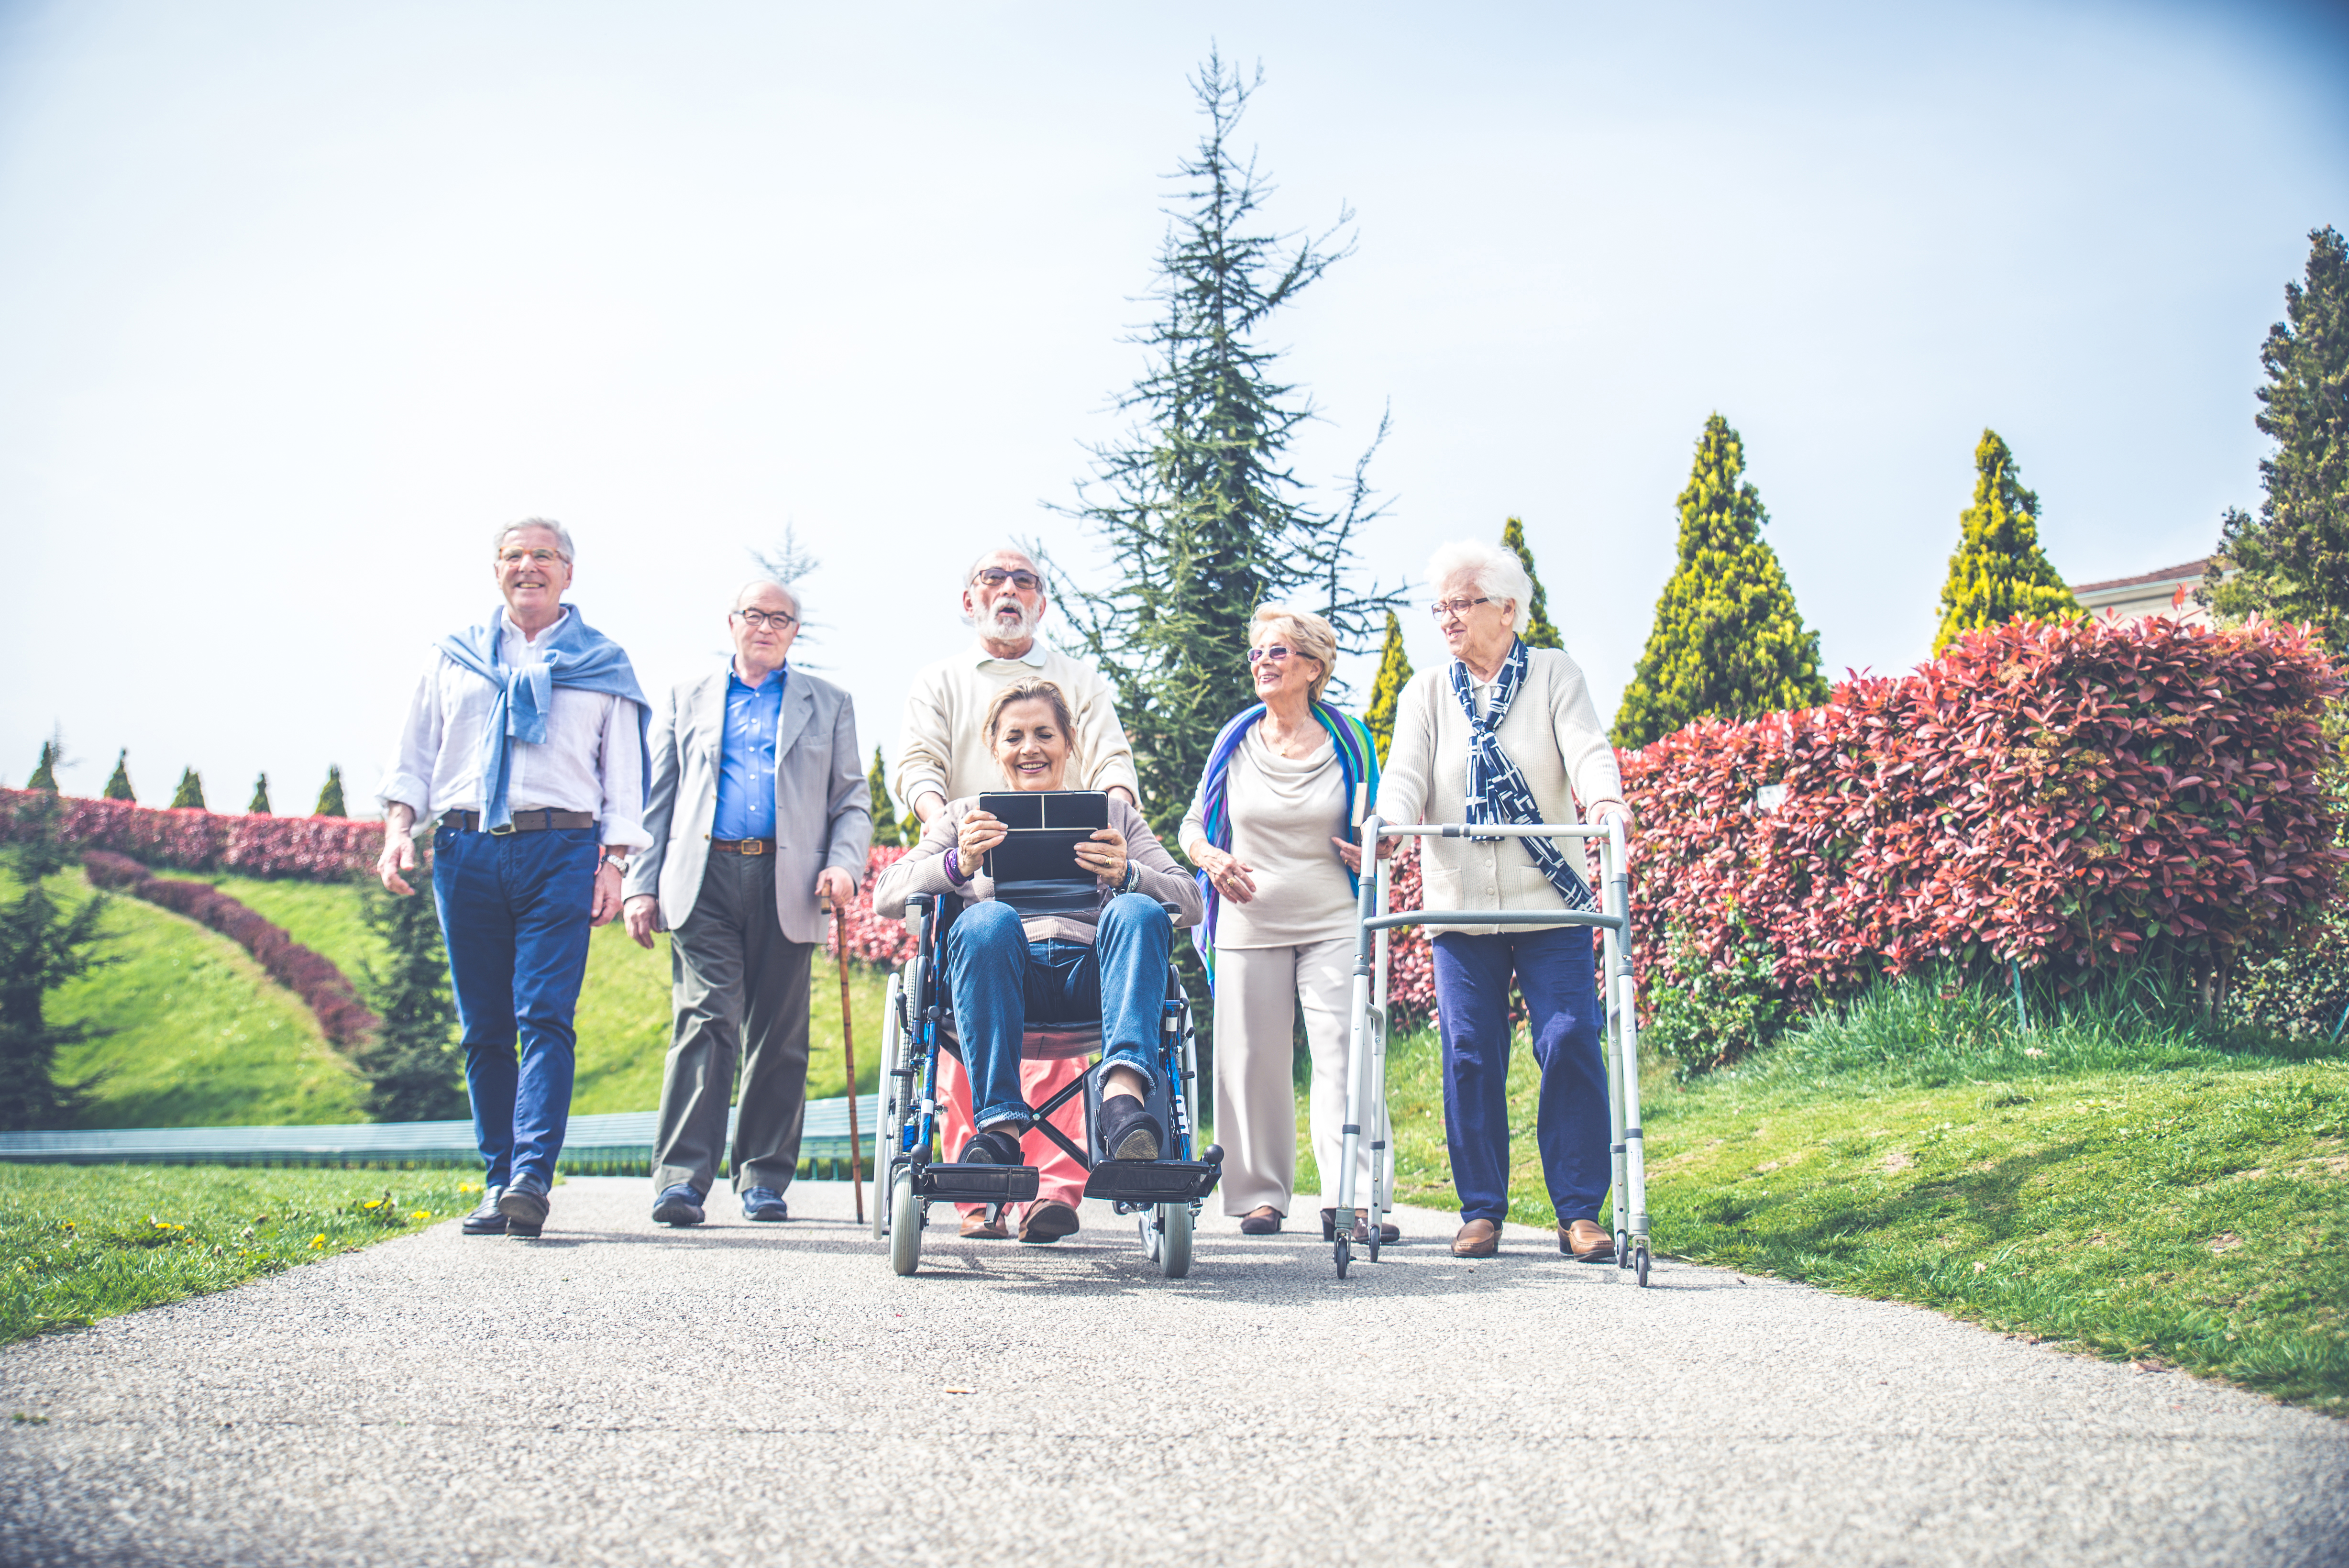 A group of people using wheelchairs, walking frames, and walking sticks on a path together in a park